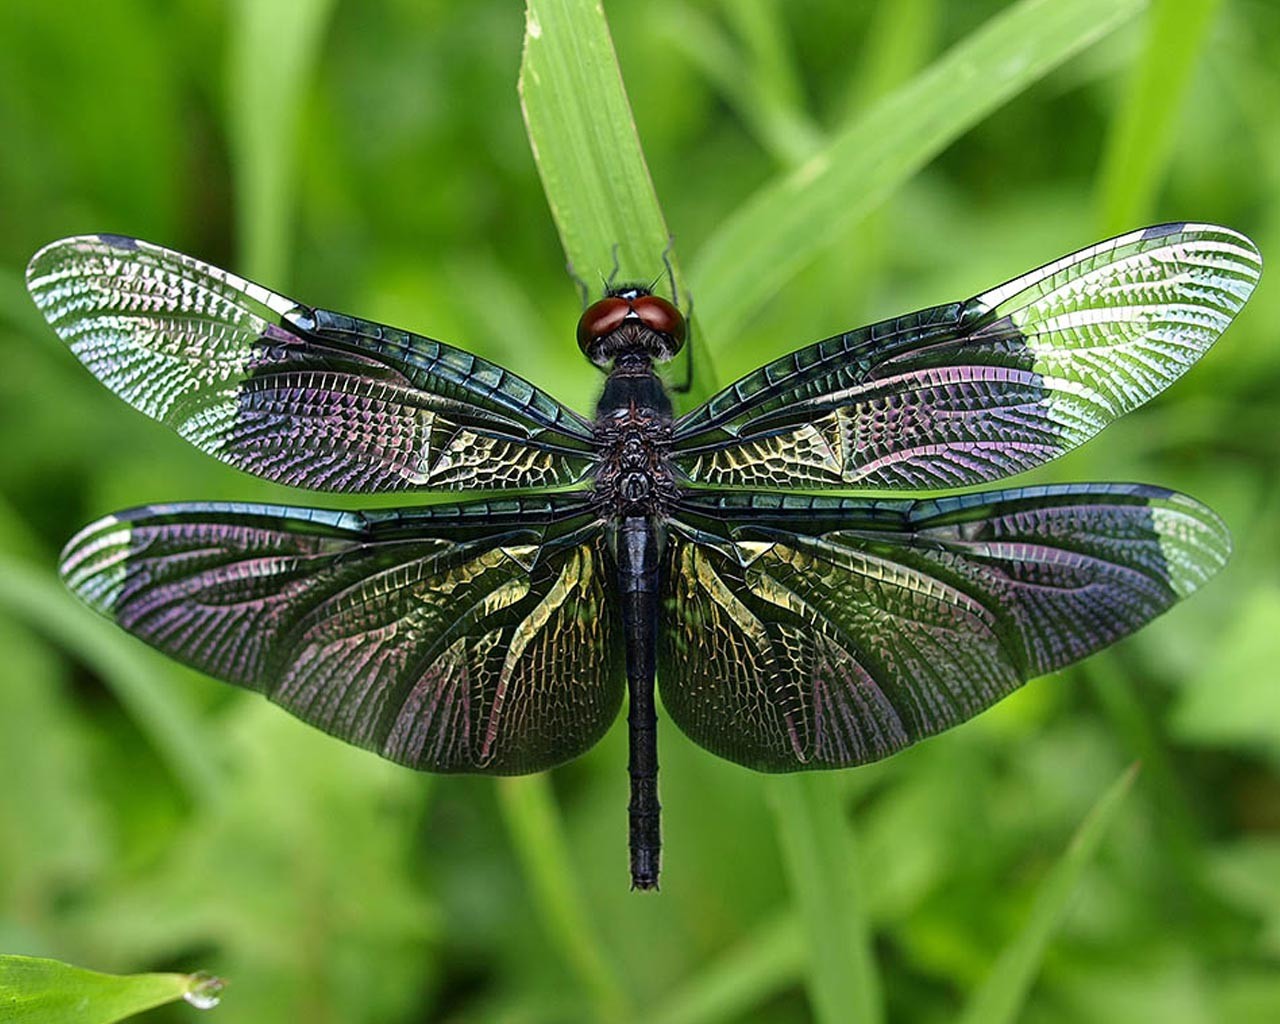 General 1280x1024 nature dragonflies insect animals